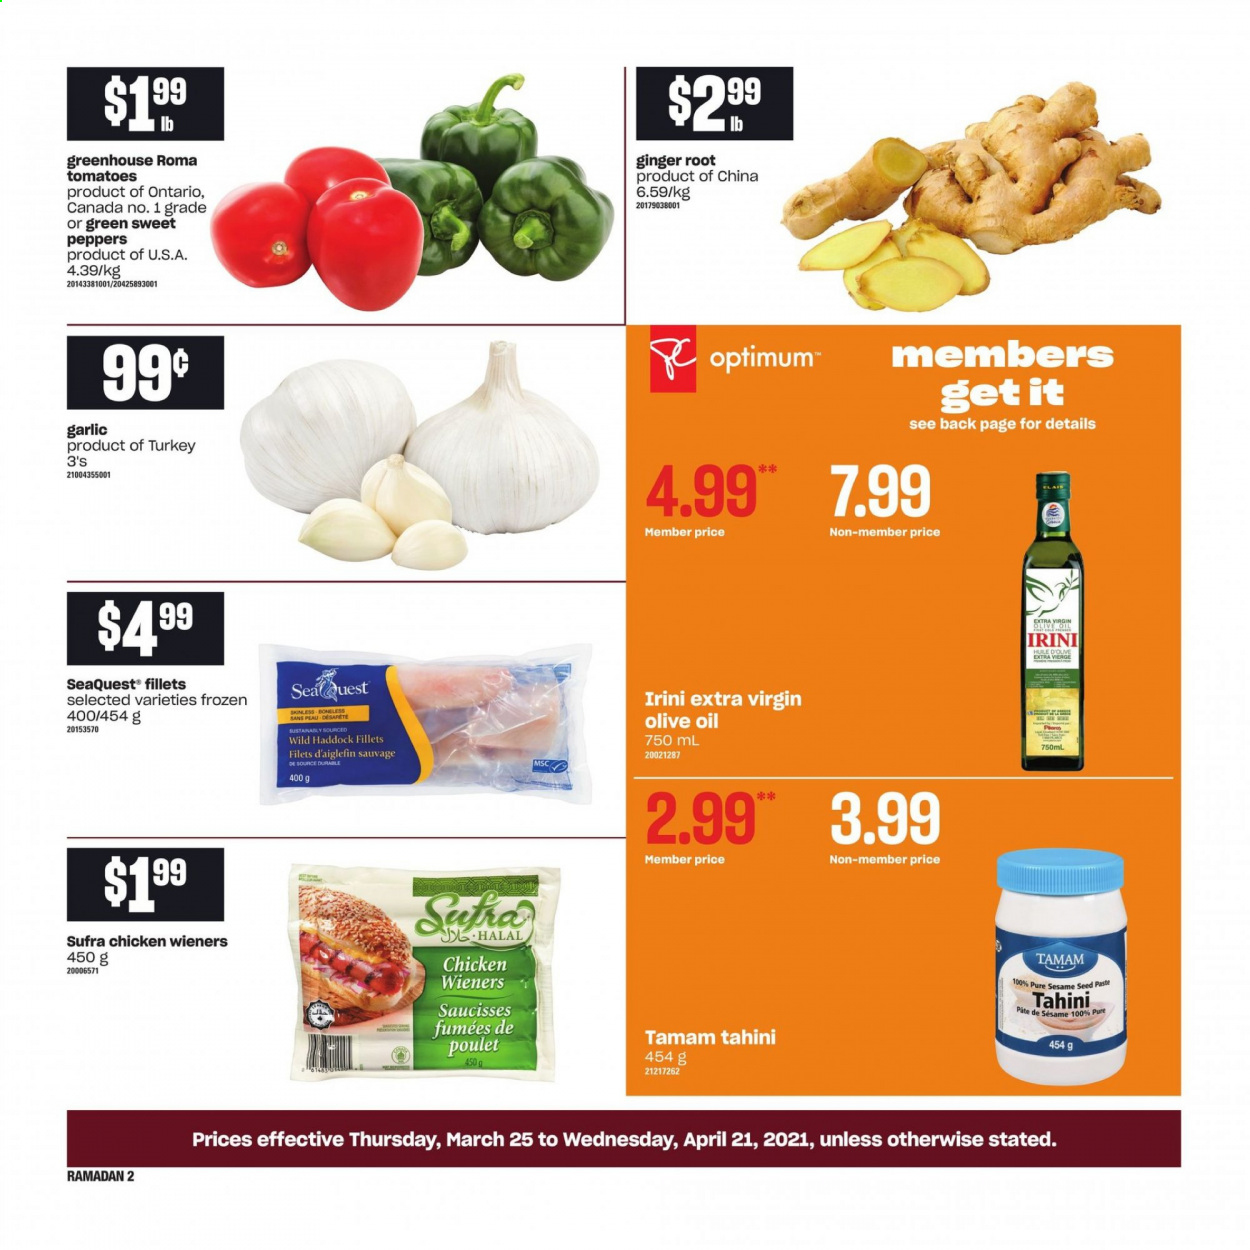 thumbnail - Atlantic Superstore Flyer - March 25, 2021 - April 21, 2021 - Sales products - garlic, ginger, tomatoes, haddock, sesame seed, tahini, extra virgin olive oil, olive oil, oil, Optimum. Page 2.